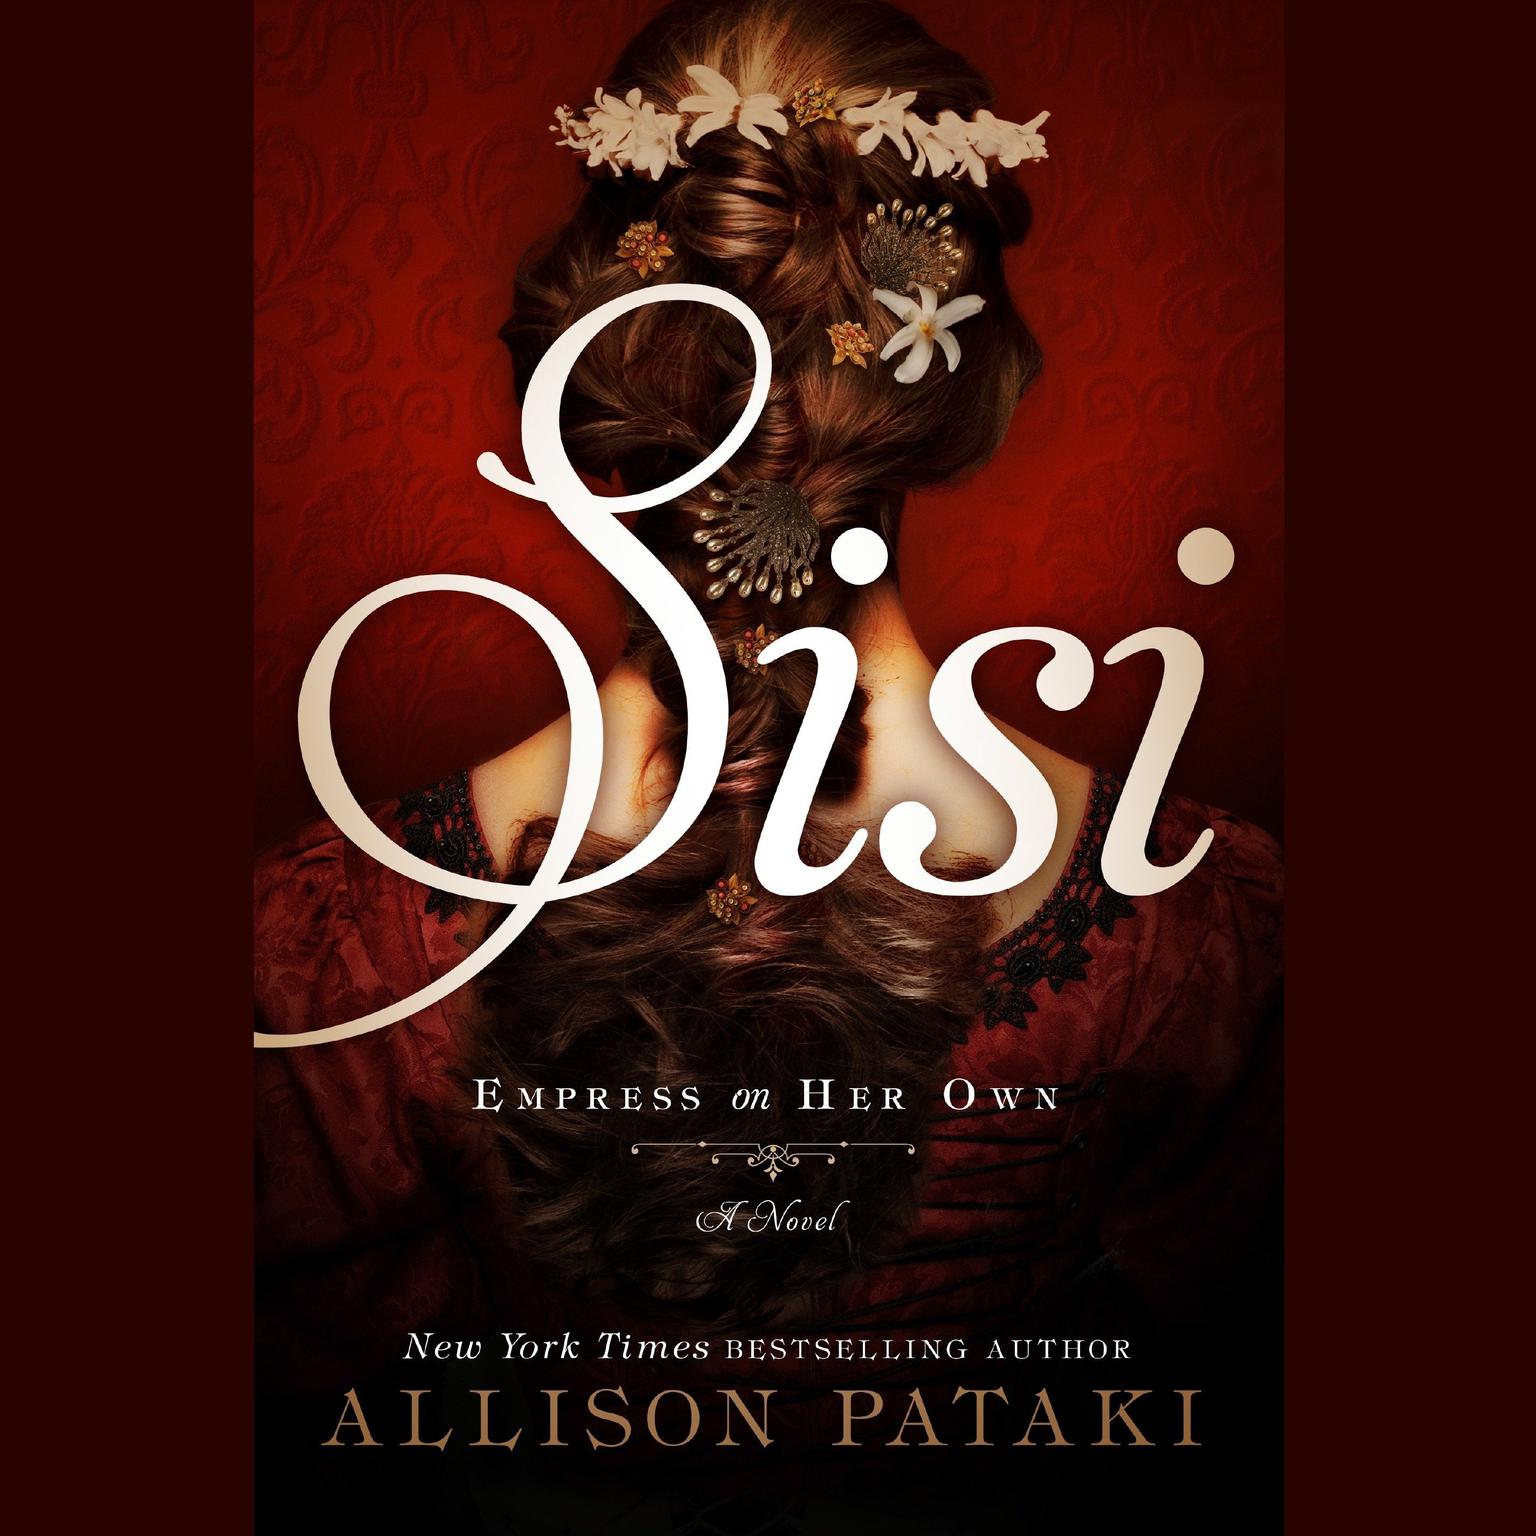 Sisi: Empress on Her Own: A Novel Audiobook, by Allison Pataki